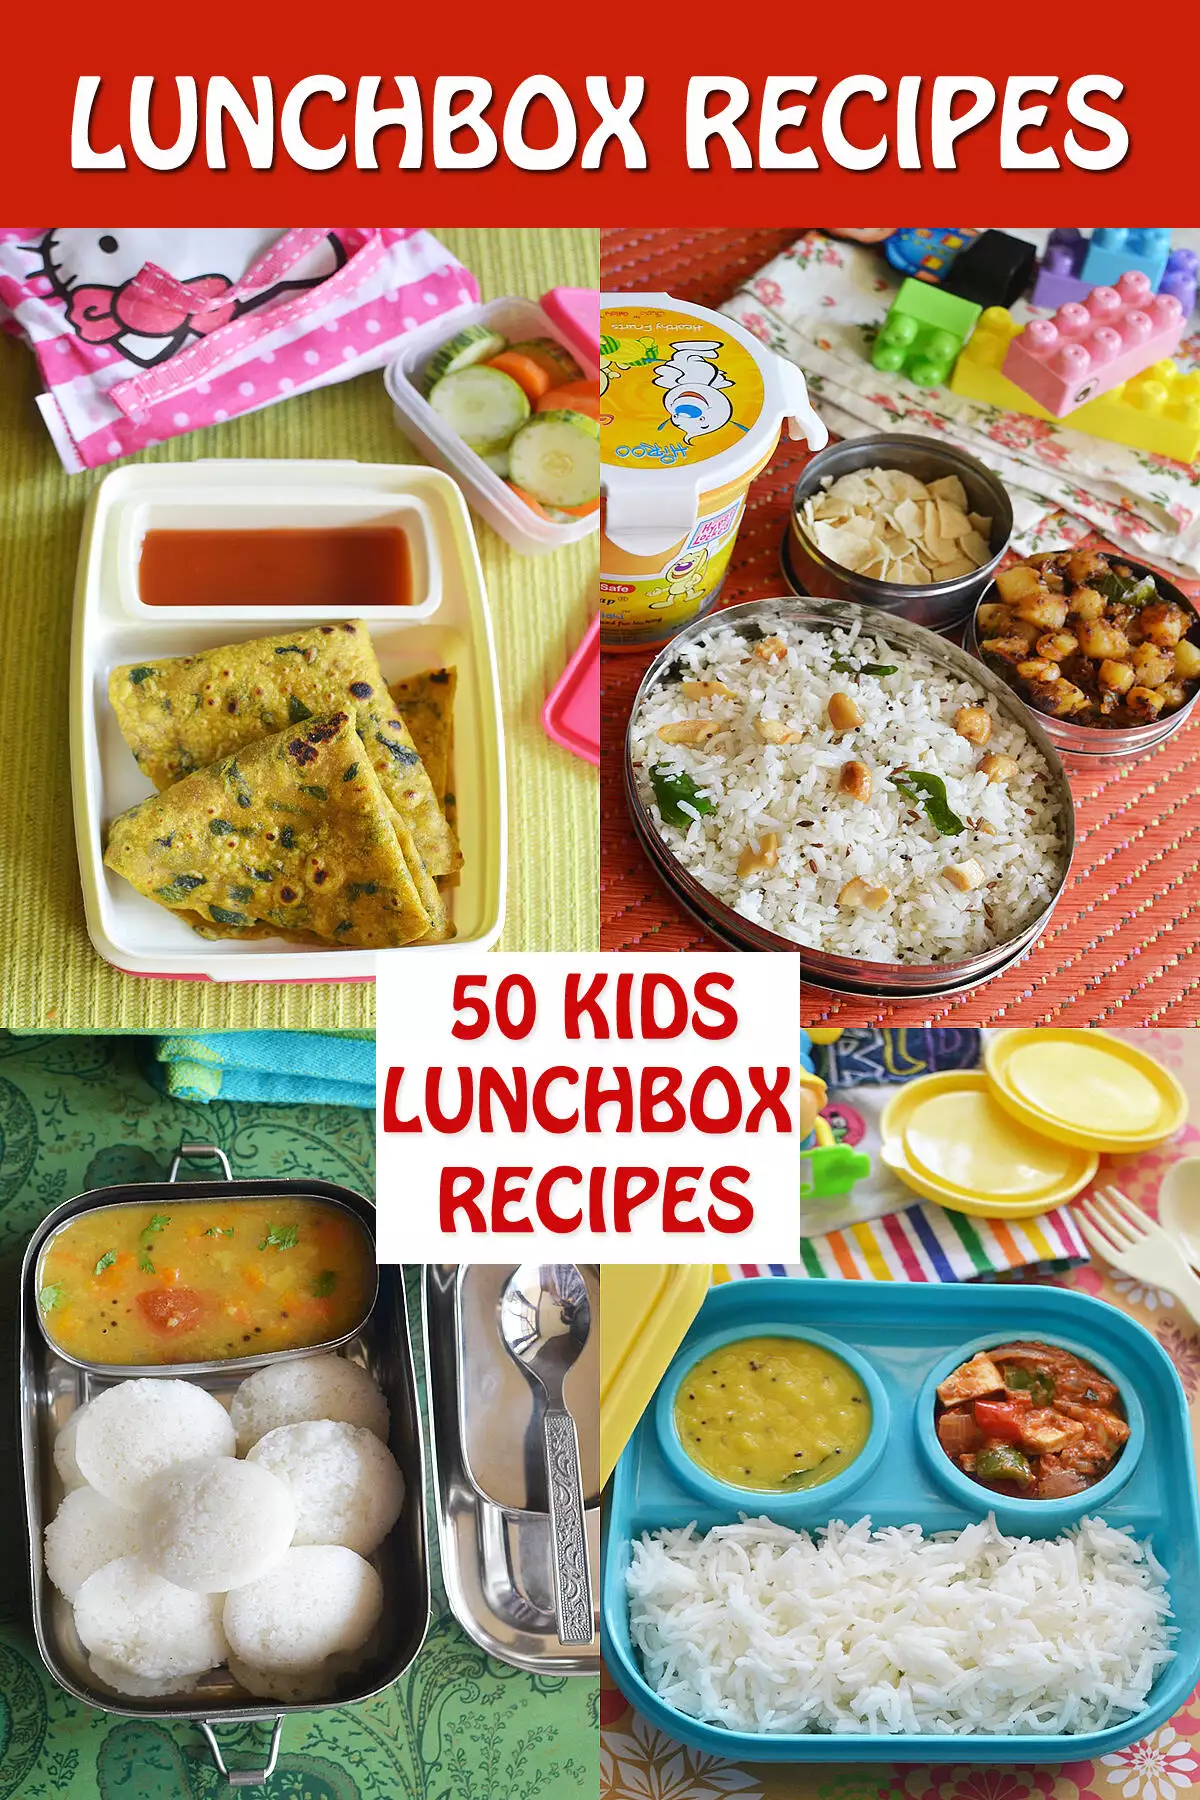 In the Kitchen: Self-Serving Snack Box Tutorial and Healthy Snack Ideas for  Kids